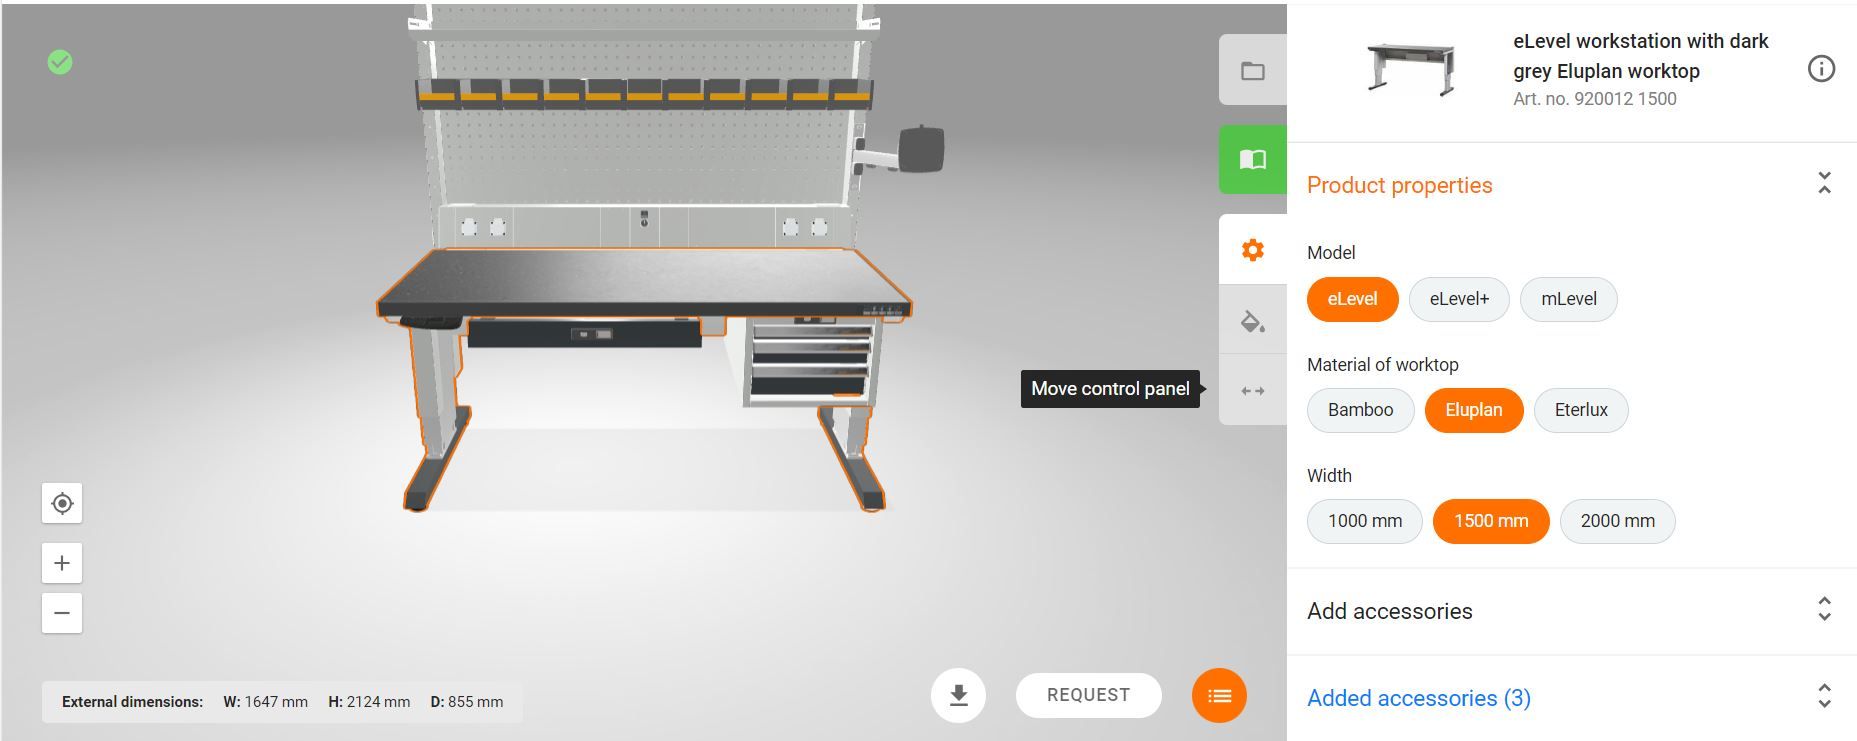 Workstation Configurator Product features